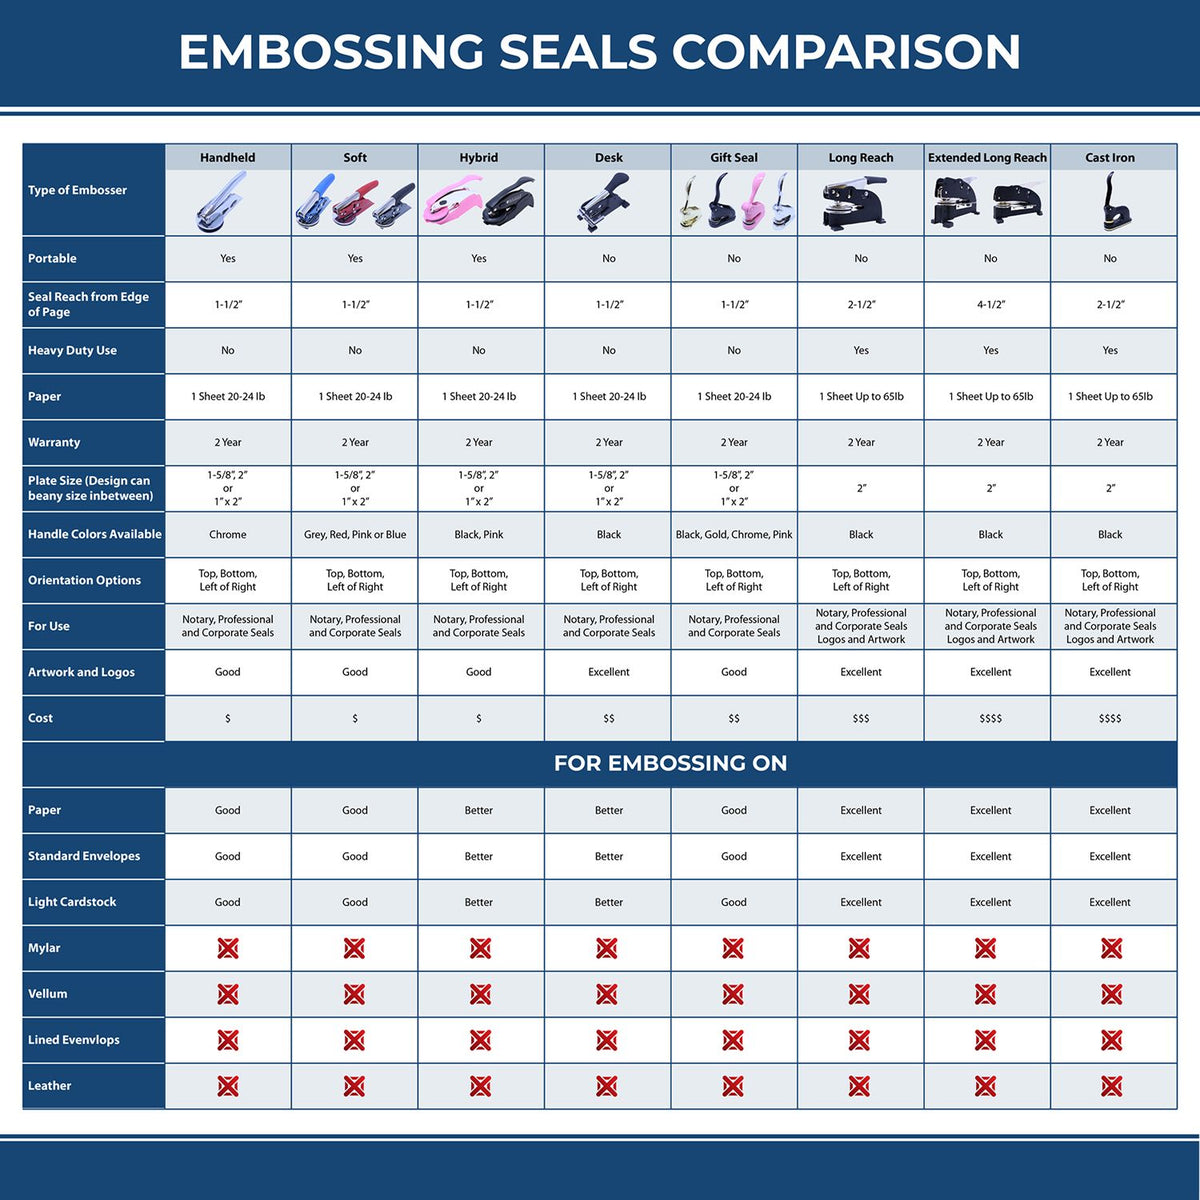 A comparison chart for the different types of mount models available for the Extended Long Reach Wyoming Architect Seal Embosser.